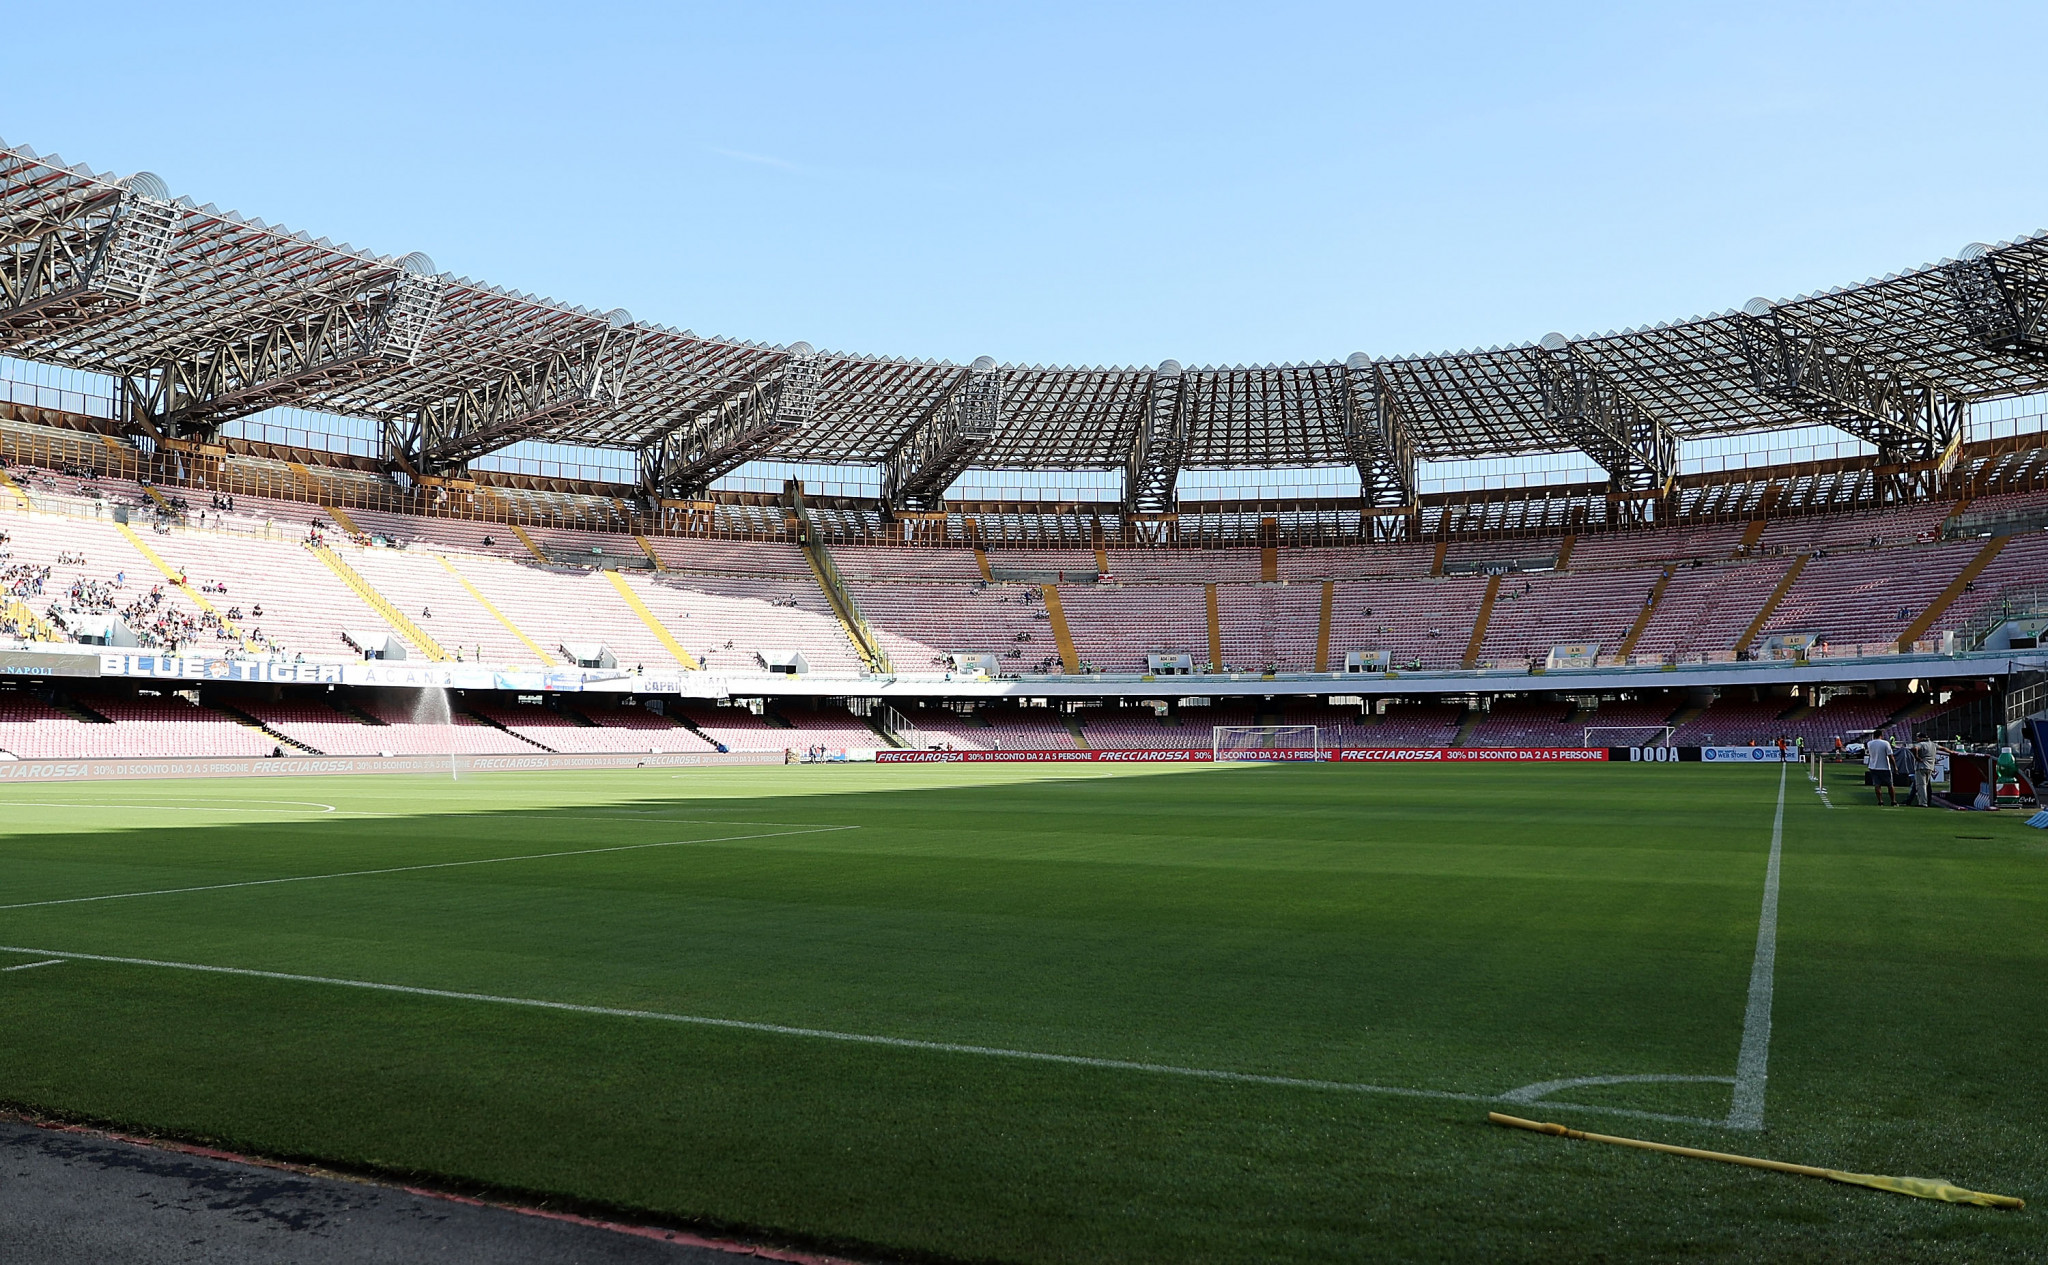 Renovation work is taking place at the San Paolo Stadium in Naples, where the Opening and Closing Ceremonies of the 2019 Summer Universiade are due to take place ©Getty Images